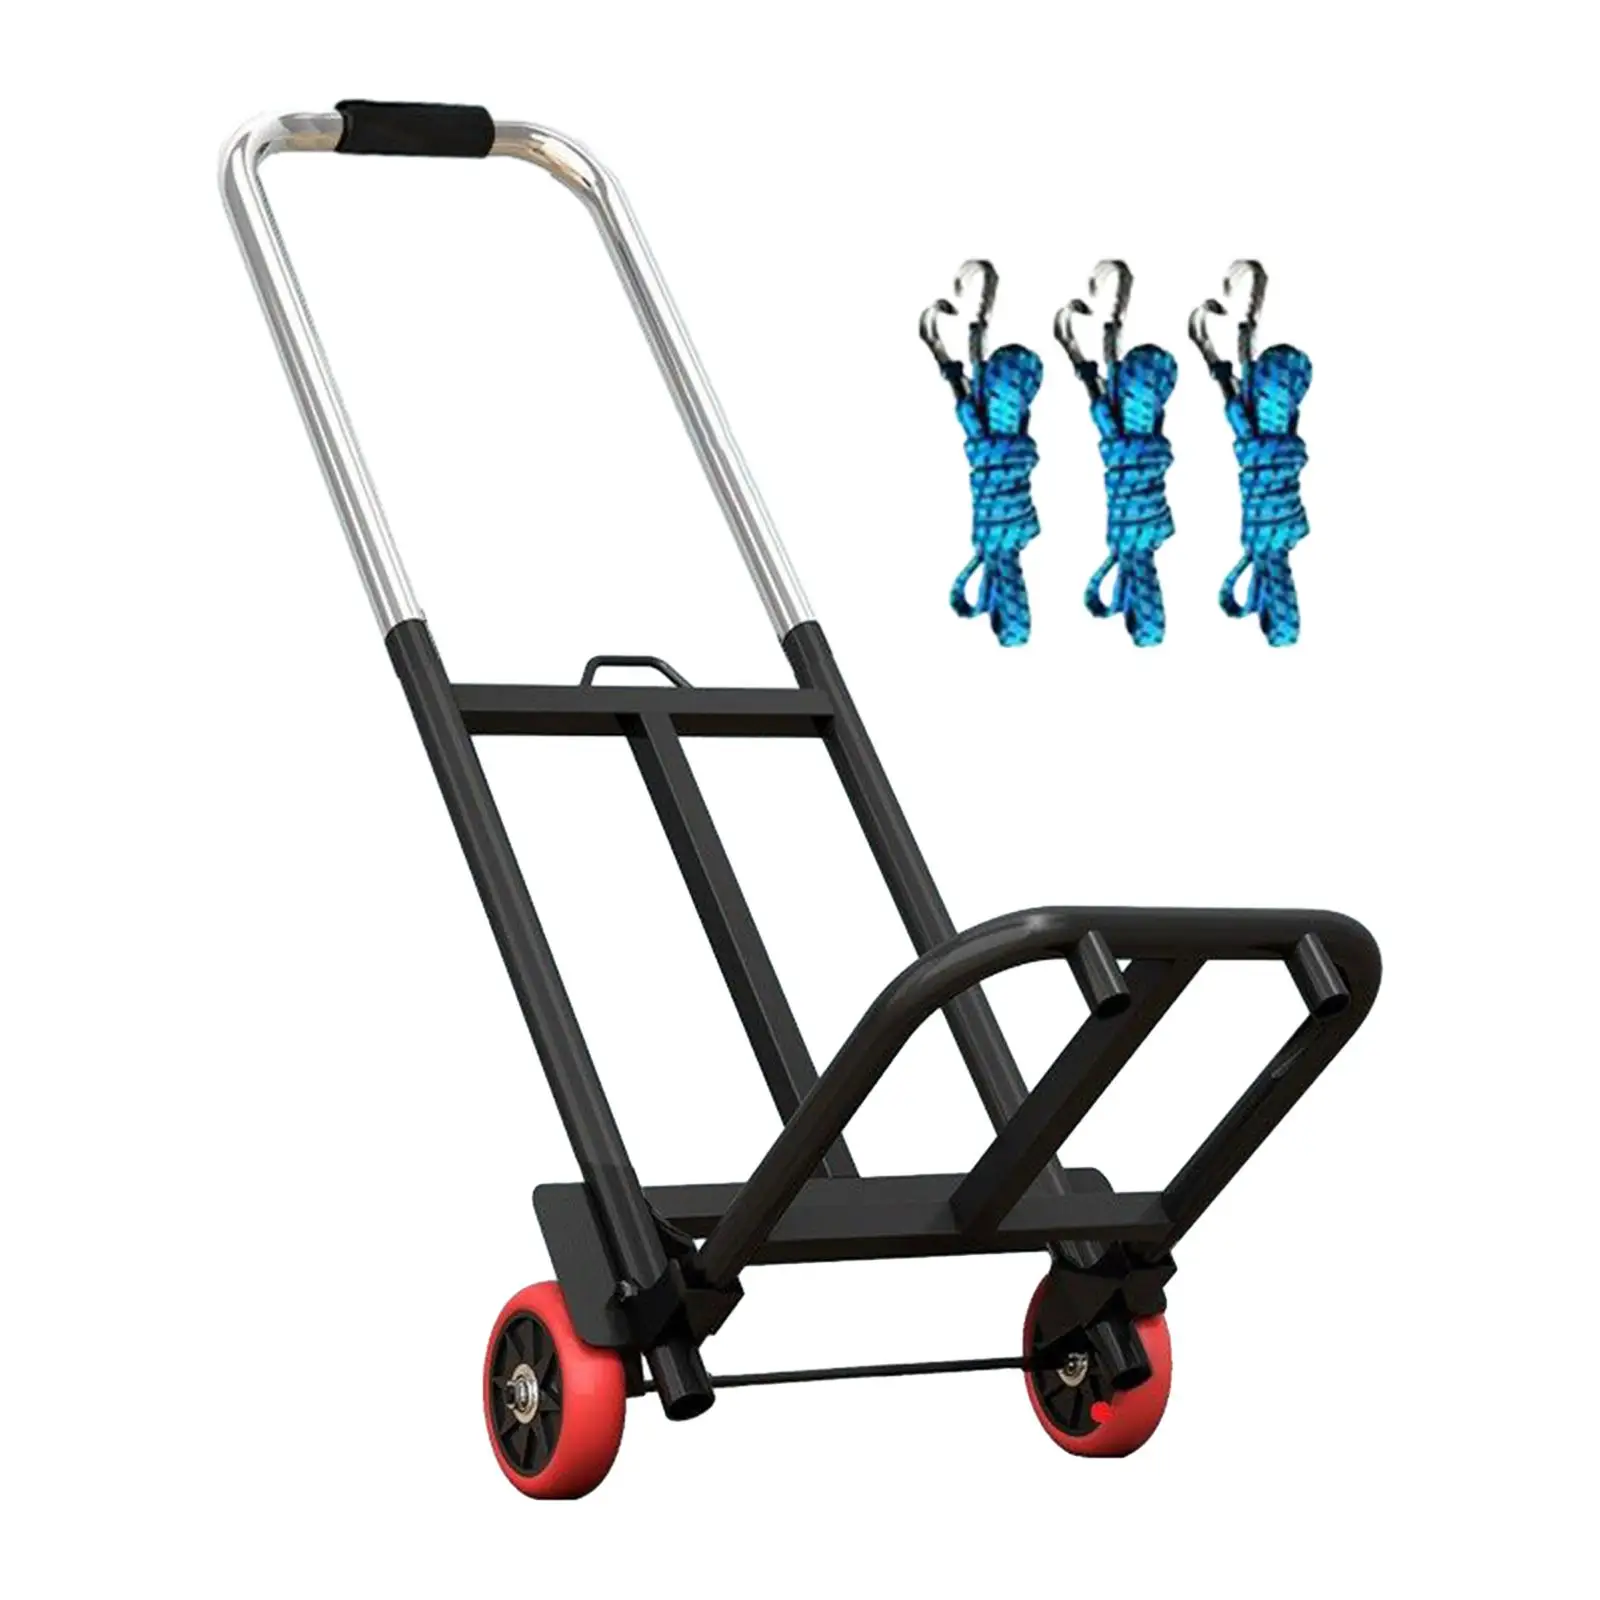 Foldable Hand Truck Luggage Hand Cart Durable Adjustable Handle for Couriers